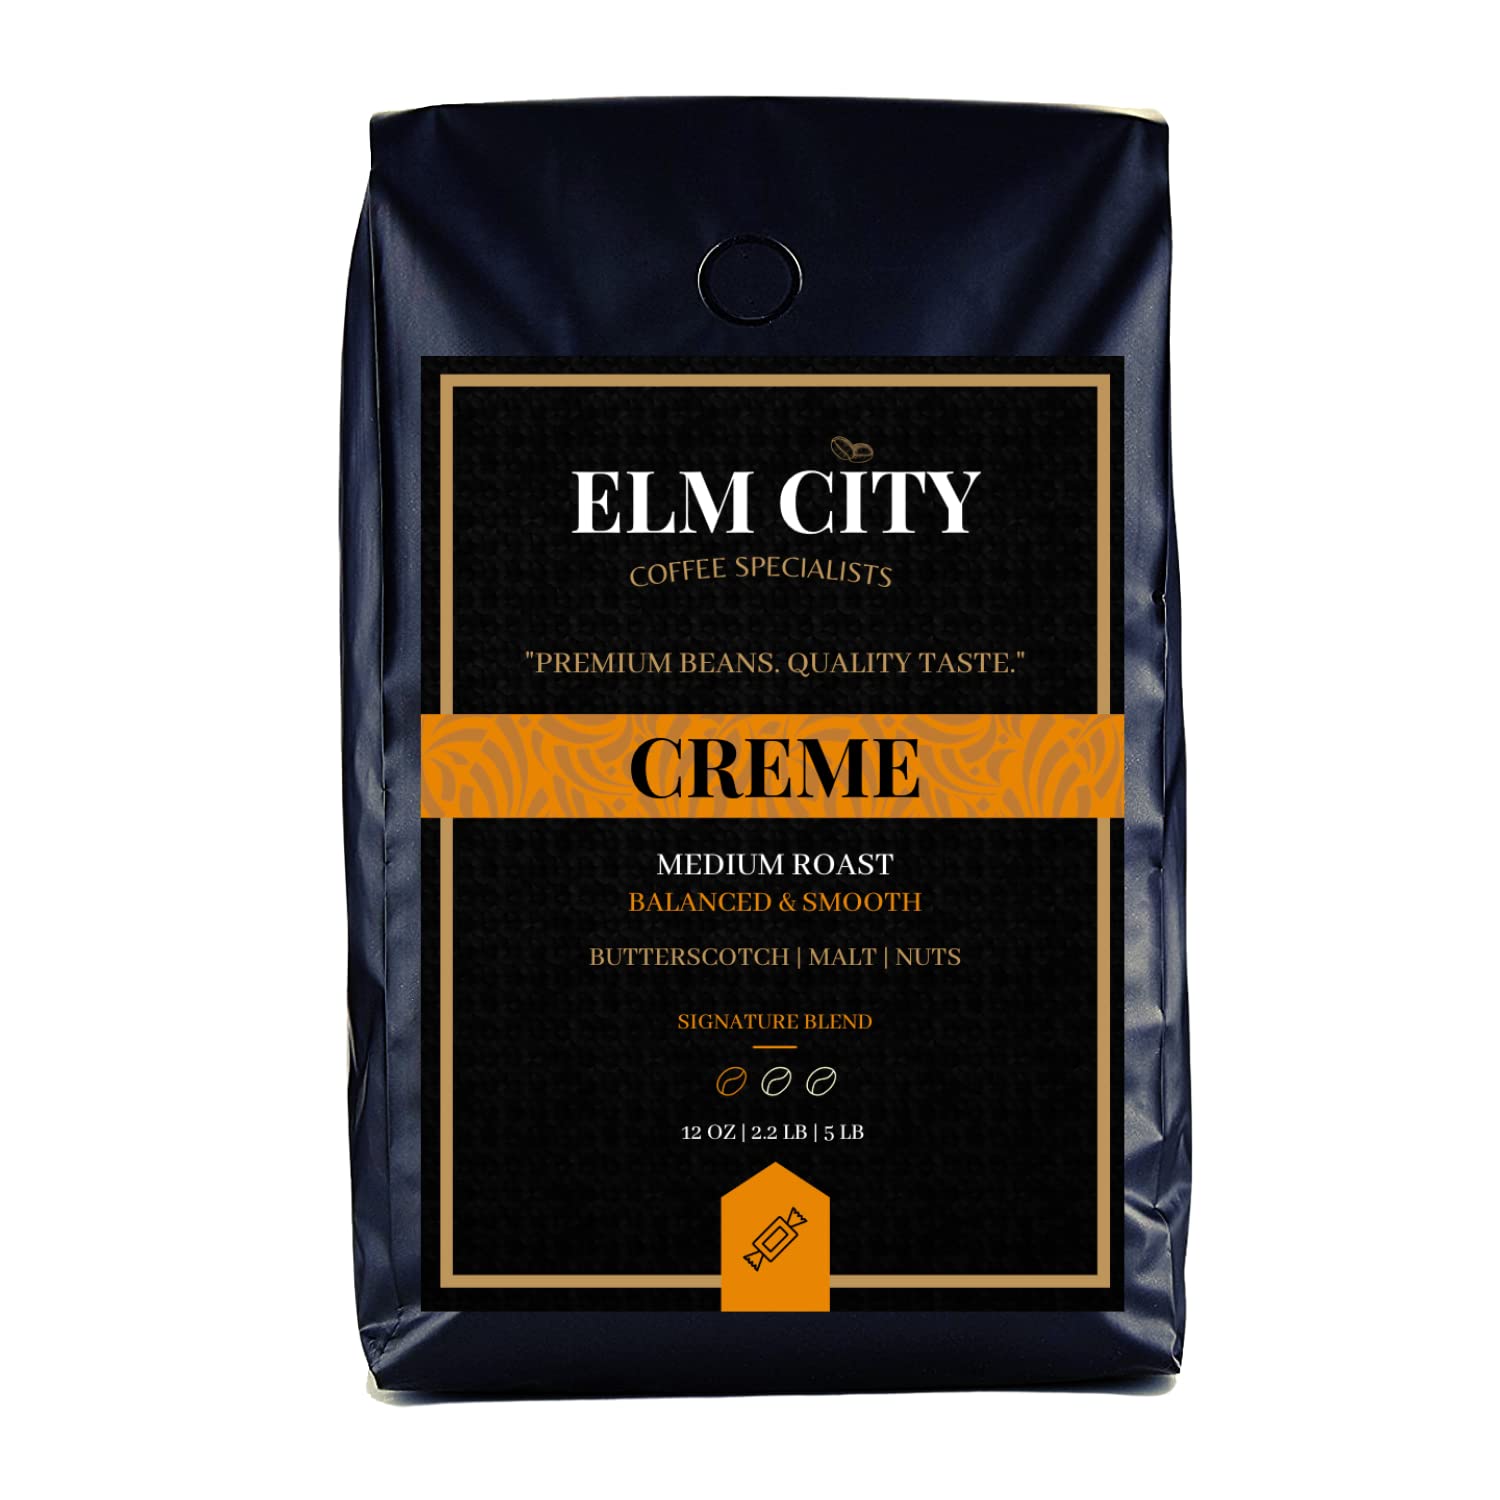 Espresso Whole Bean Coffee by Elm City Coffee Specialists, Medium Roast, 100% Arabica, Hints of Butterscotch, Malt and Nuts, Low Acid, Balanced and Smooth, Ideal for Espresso, Drip or Cold Brew,